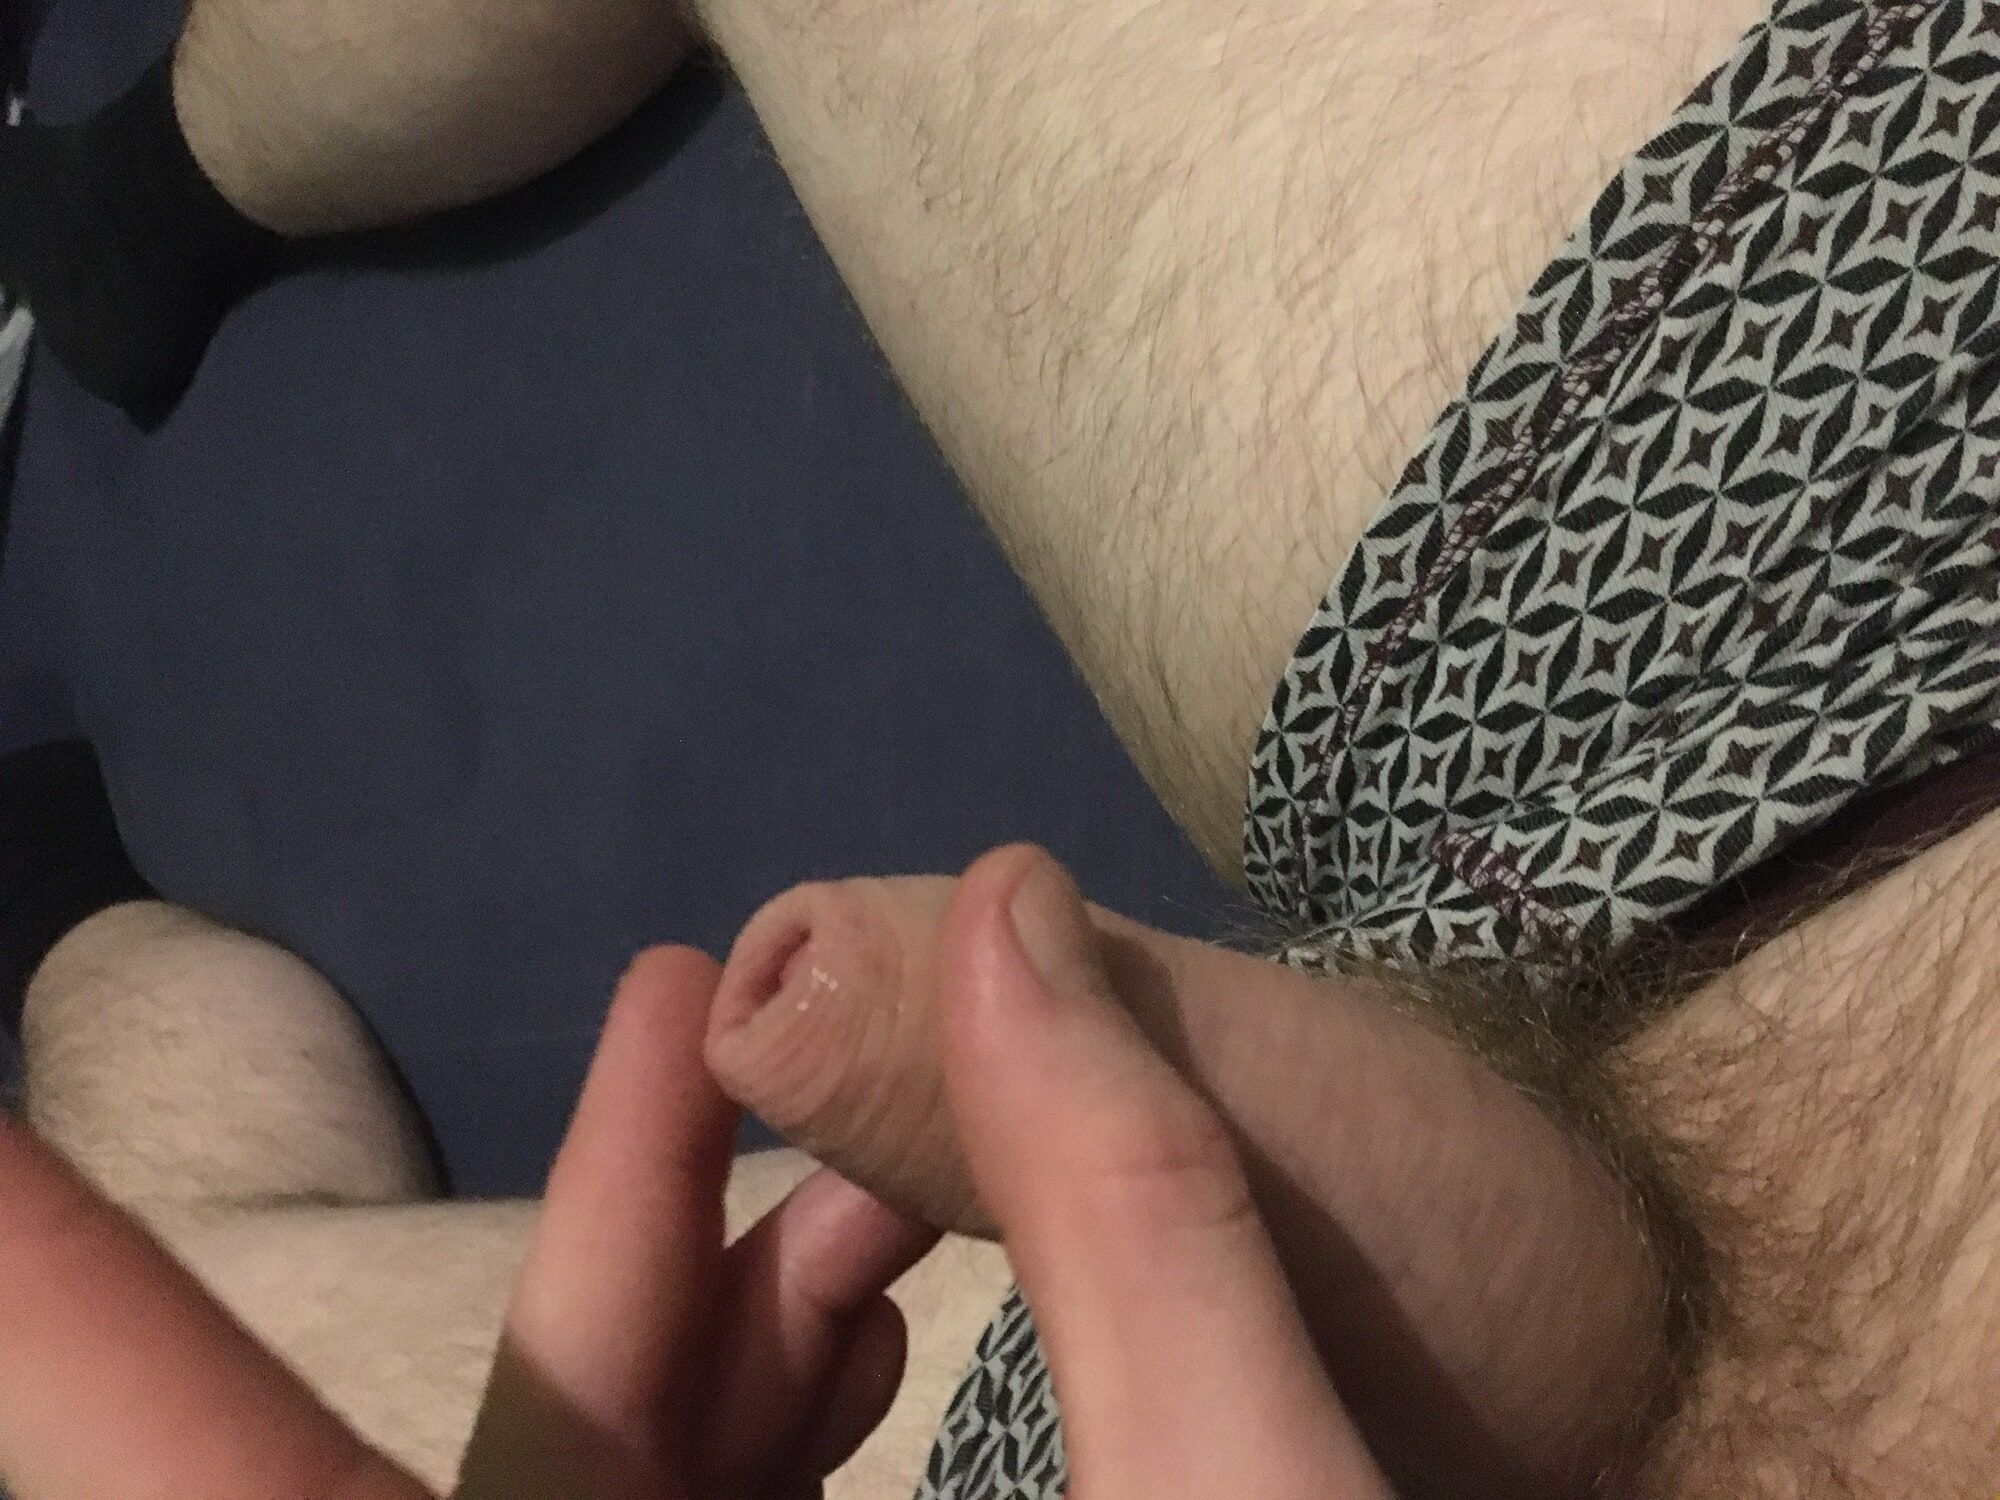 Hairy Dick And Balls Foreskin Pre-cum Play #15